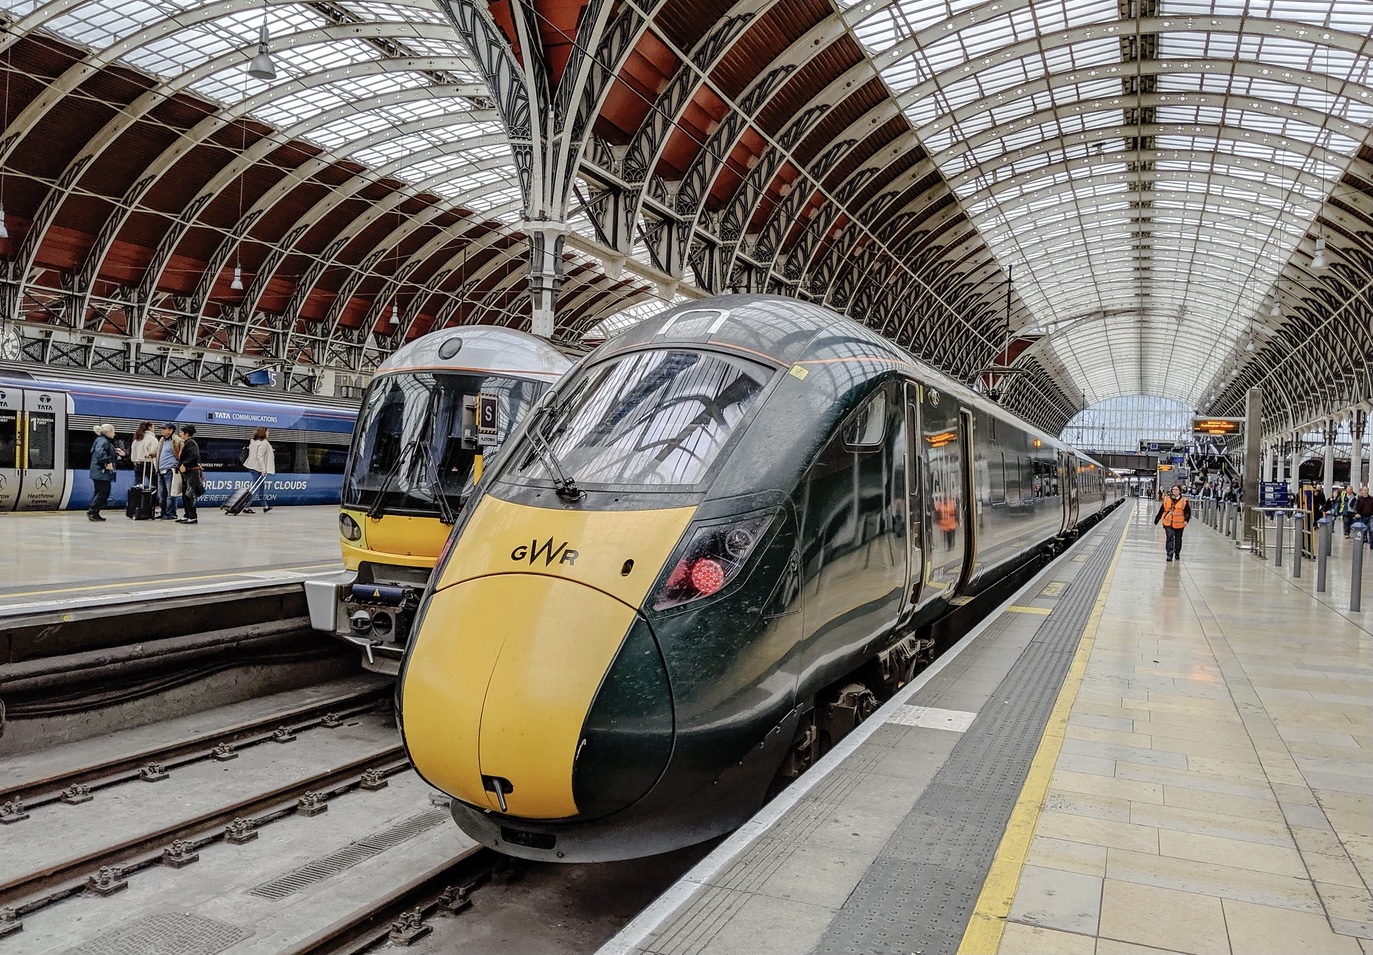 NEWS | It will cost more to travel by train in the UK from today with rail fares rising by 3.8%